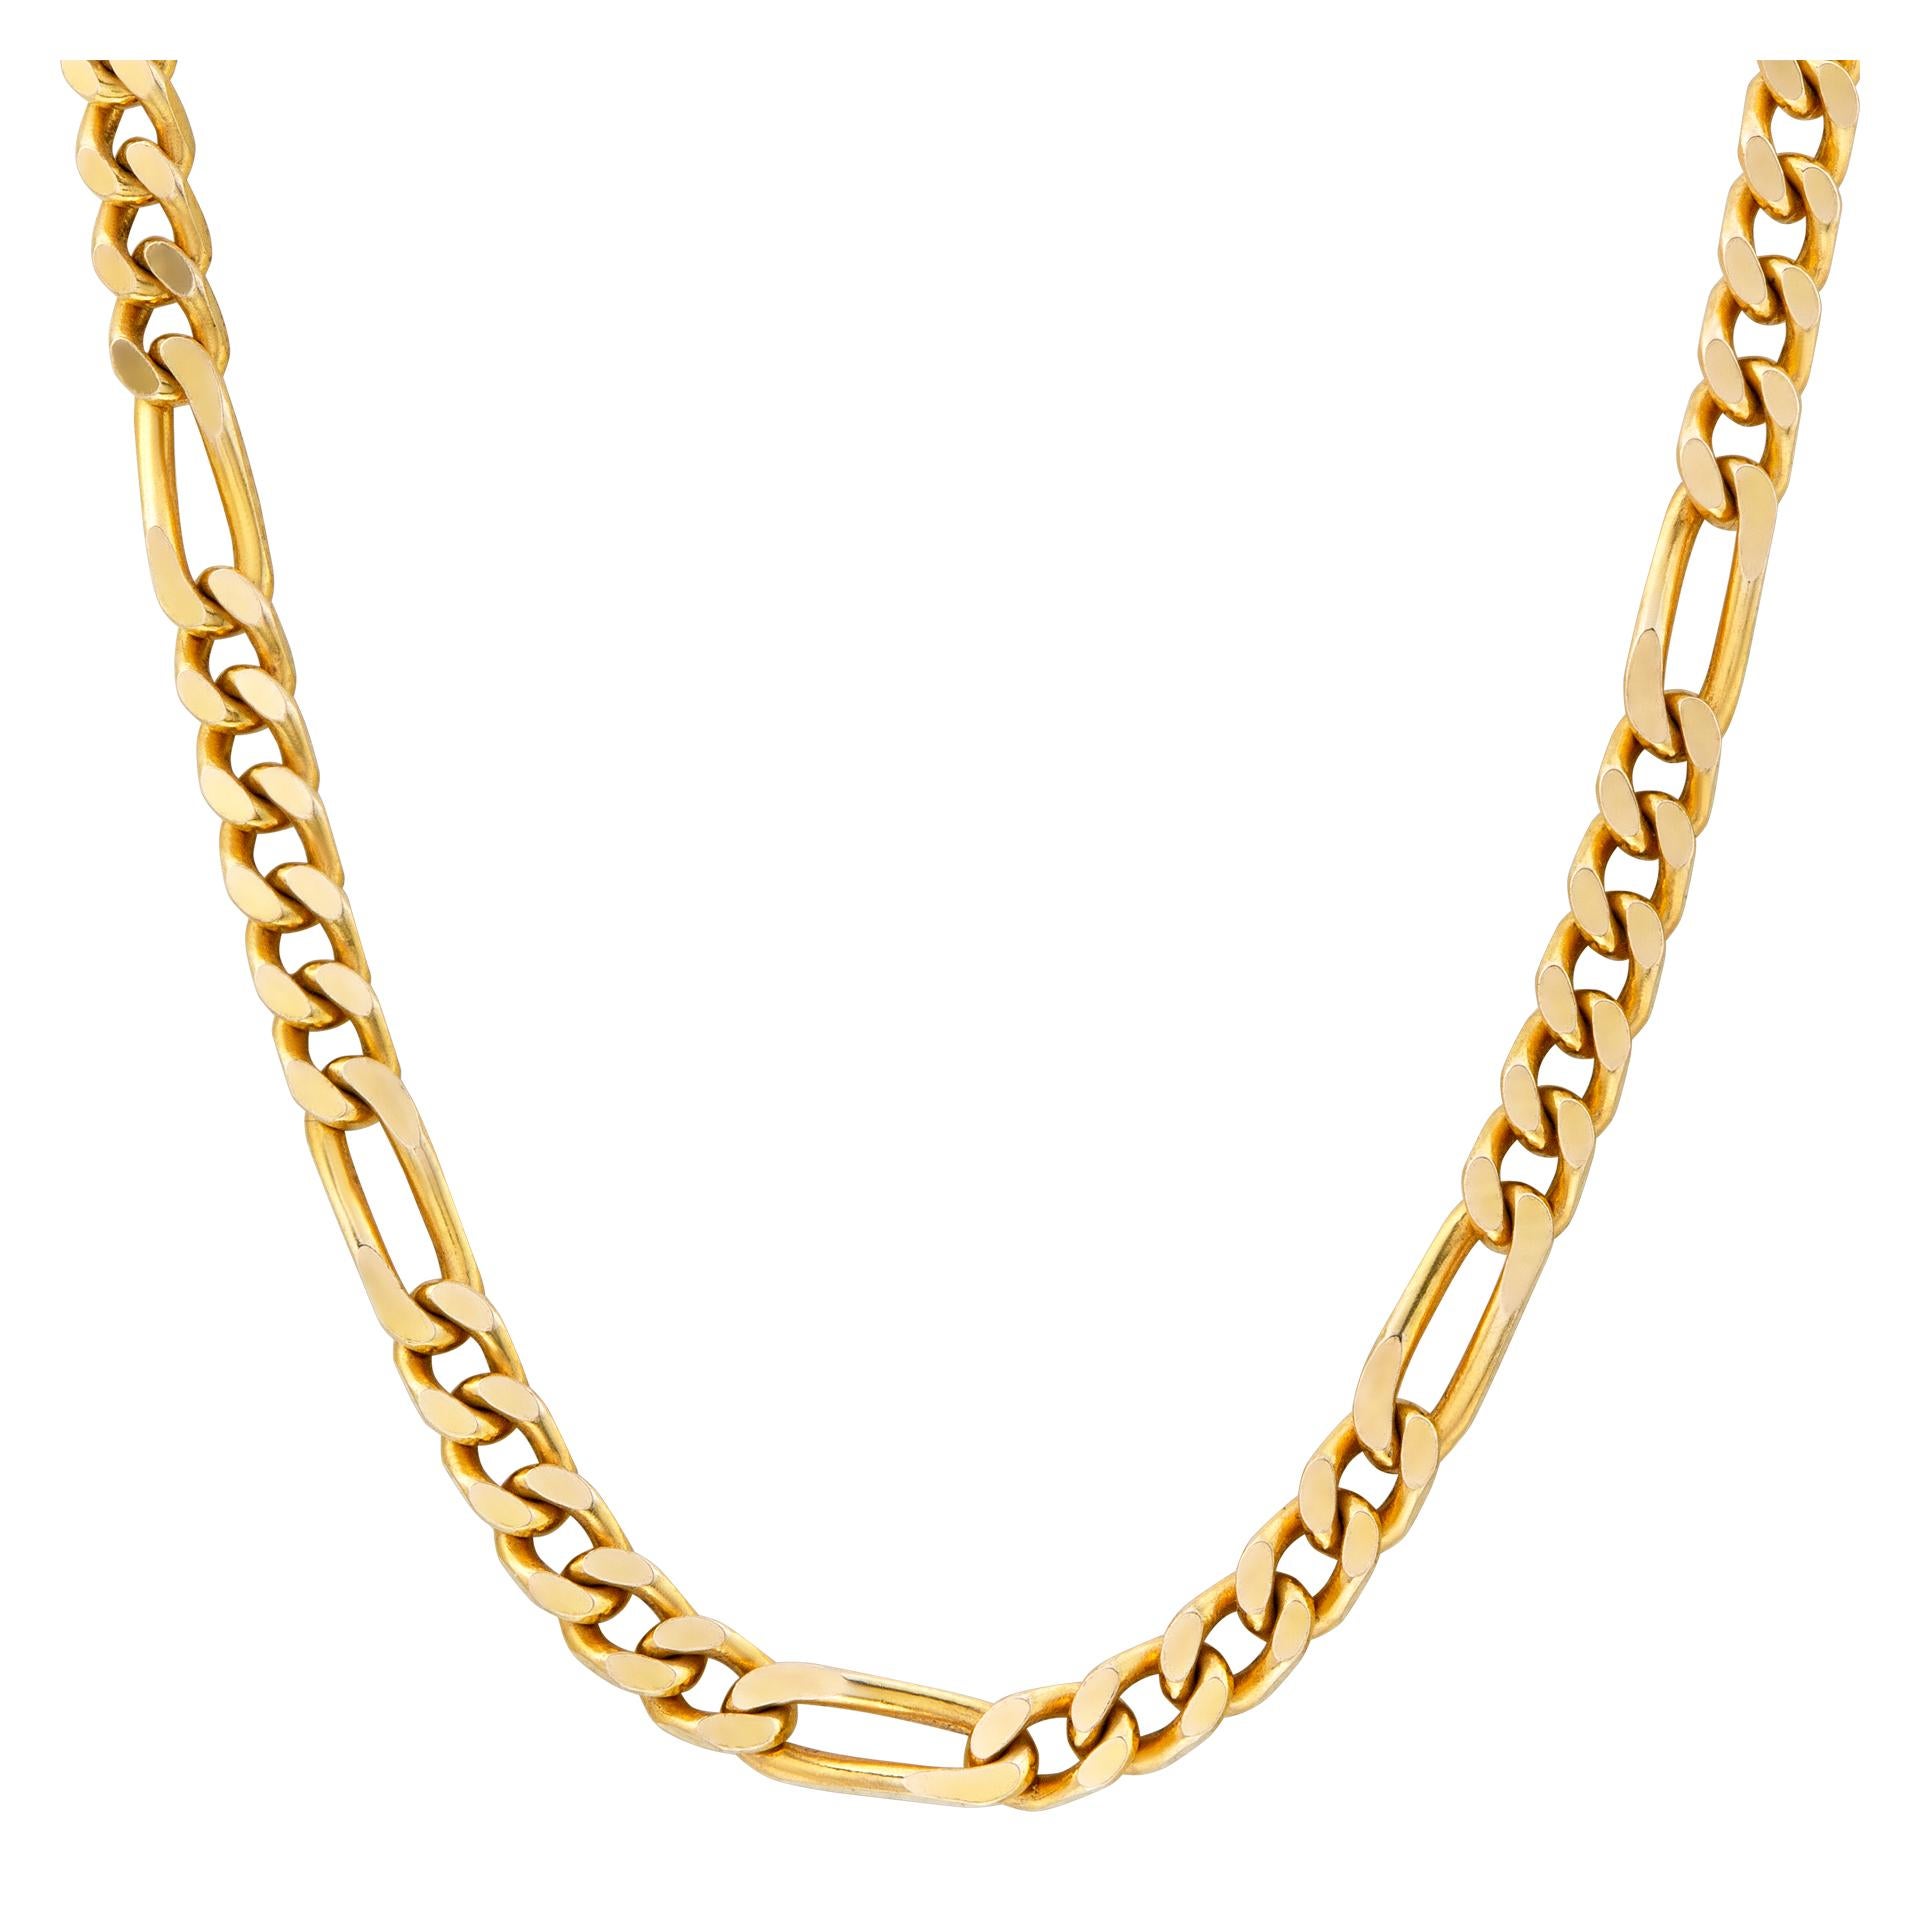 Figaro style link chain in 14k yellow gold. Length 19 inches. Width 3.1mm.
